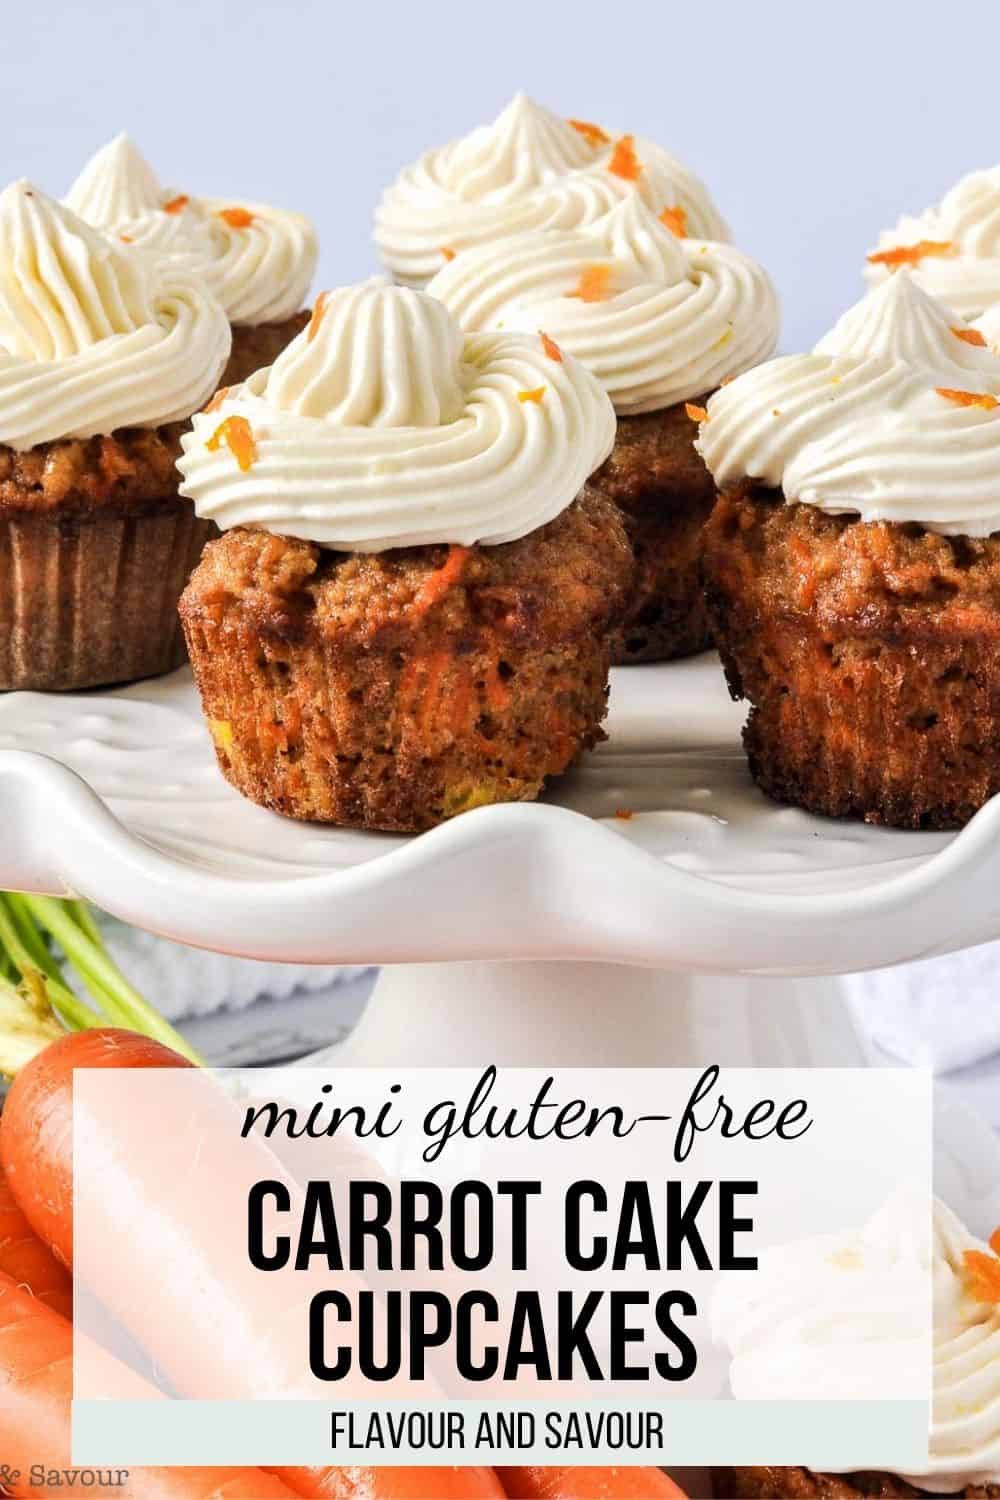 image and text for mini gluten-free carrot cake cupcakes